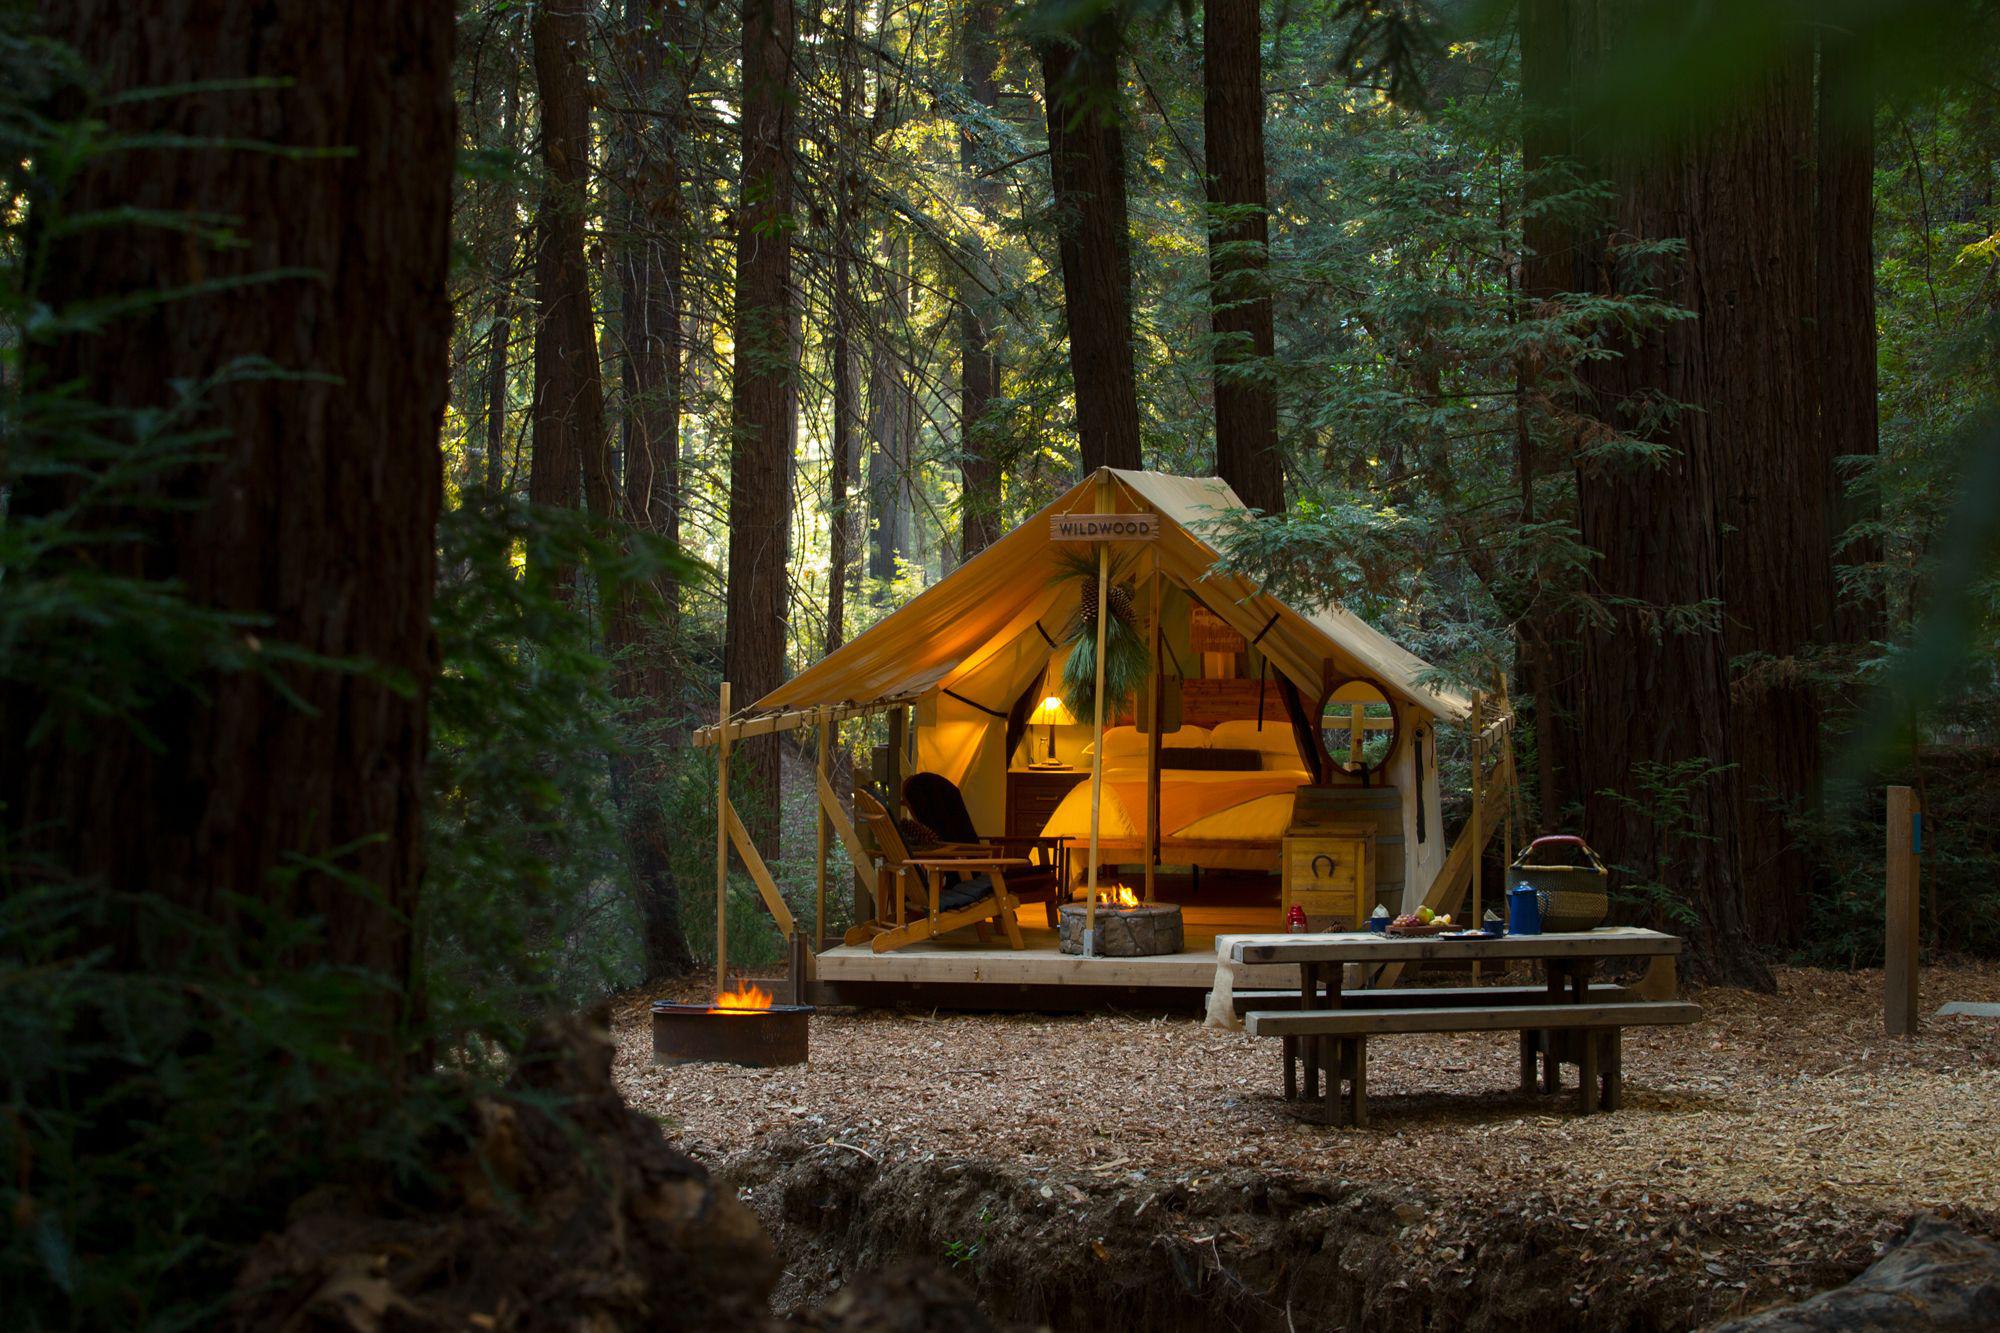 Hot Sex School Picnic Foresht - Find rustic luxury at Northern California's 5 best glampgrounds - 7x7 Bay  Area